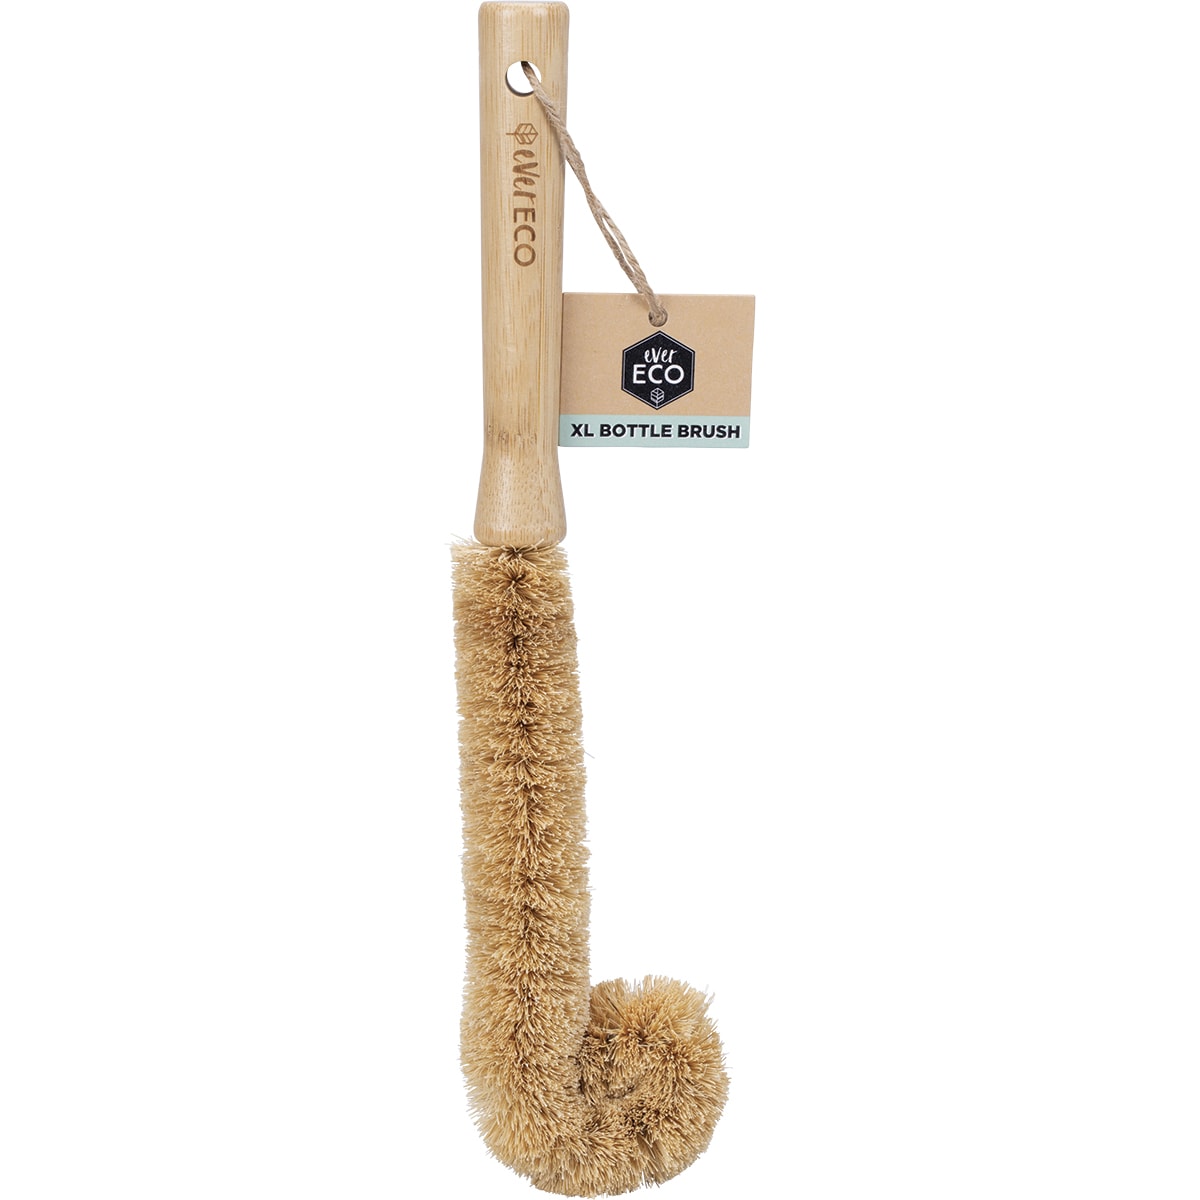 Ever Eco extra long bamboo bottle brush with coconut  fibre bristles with tag